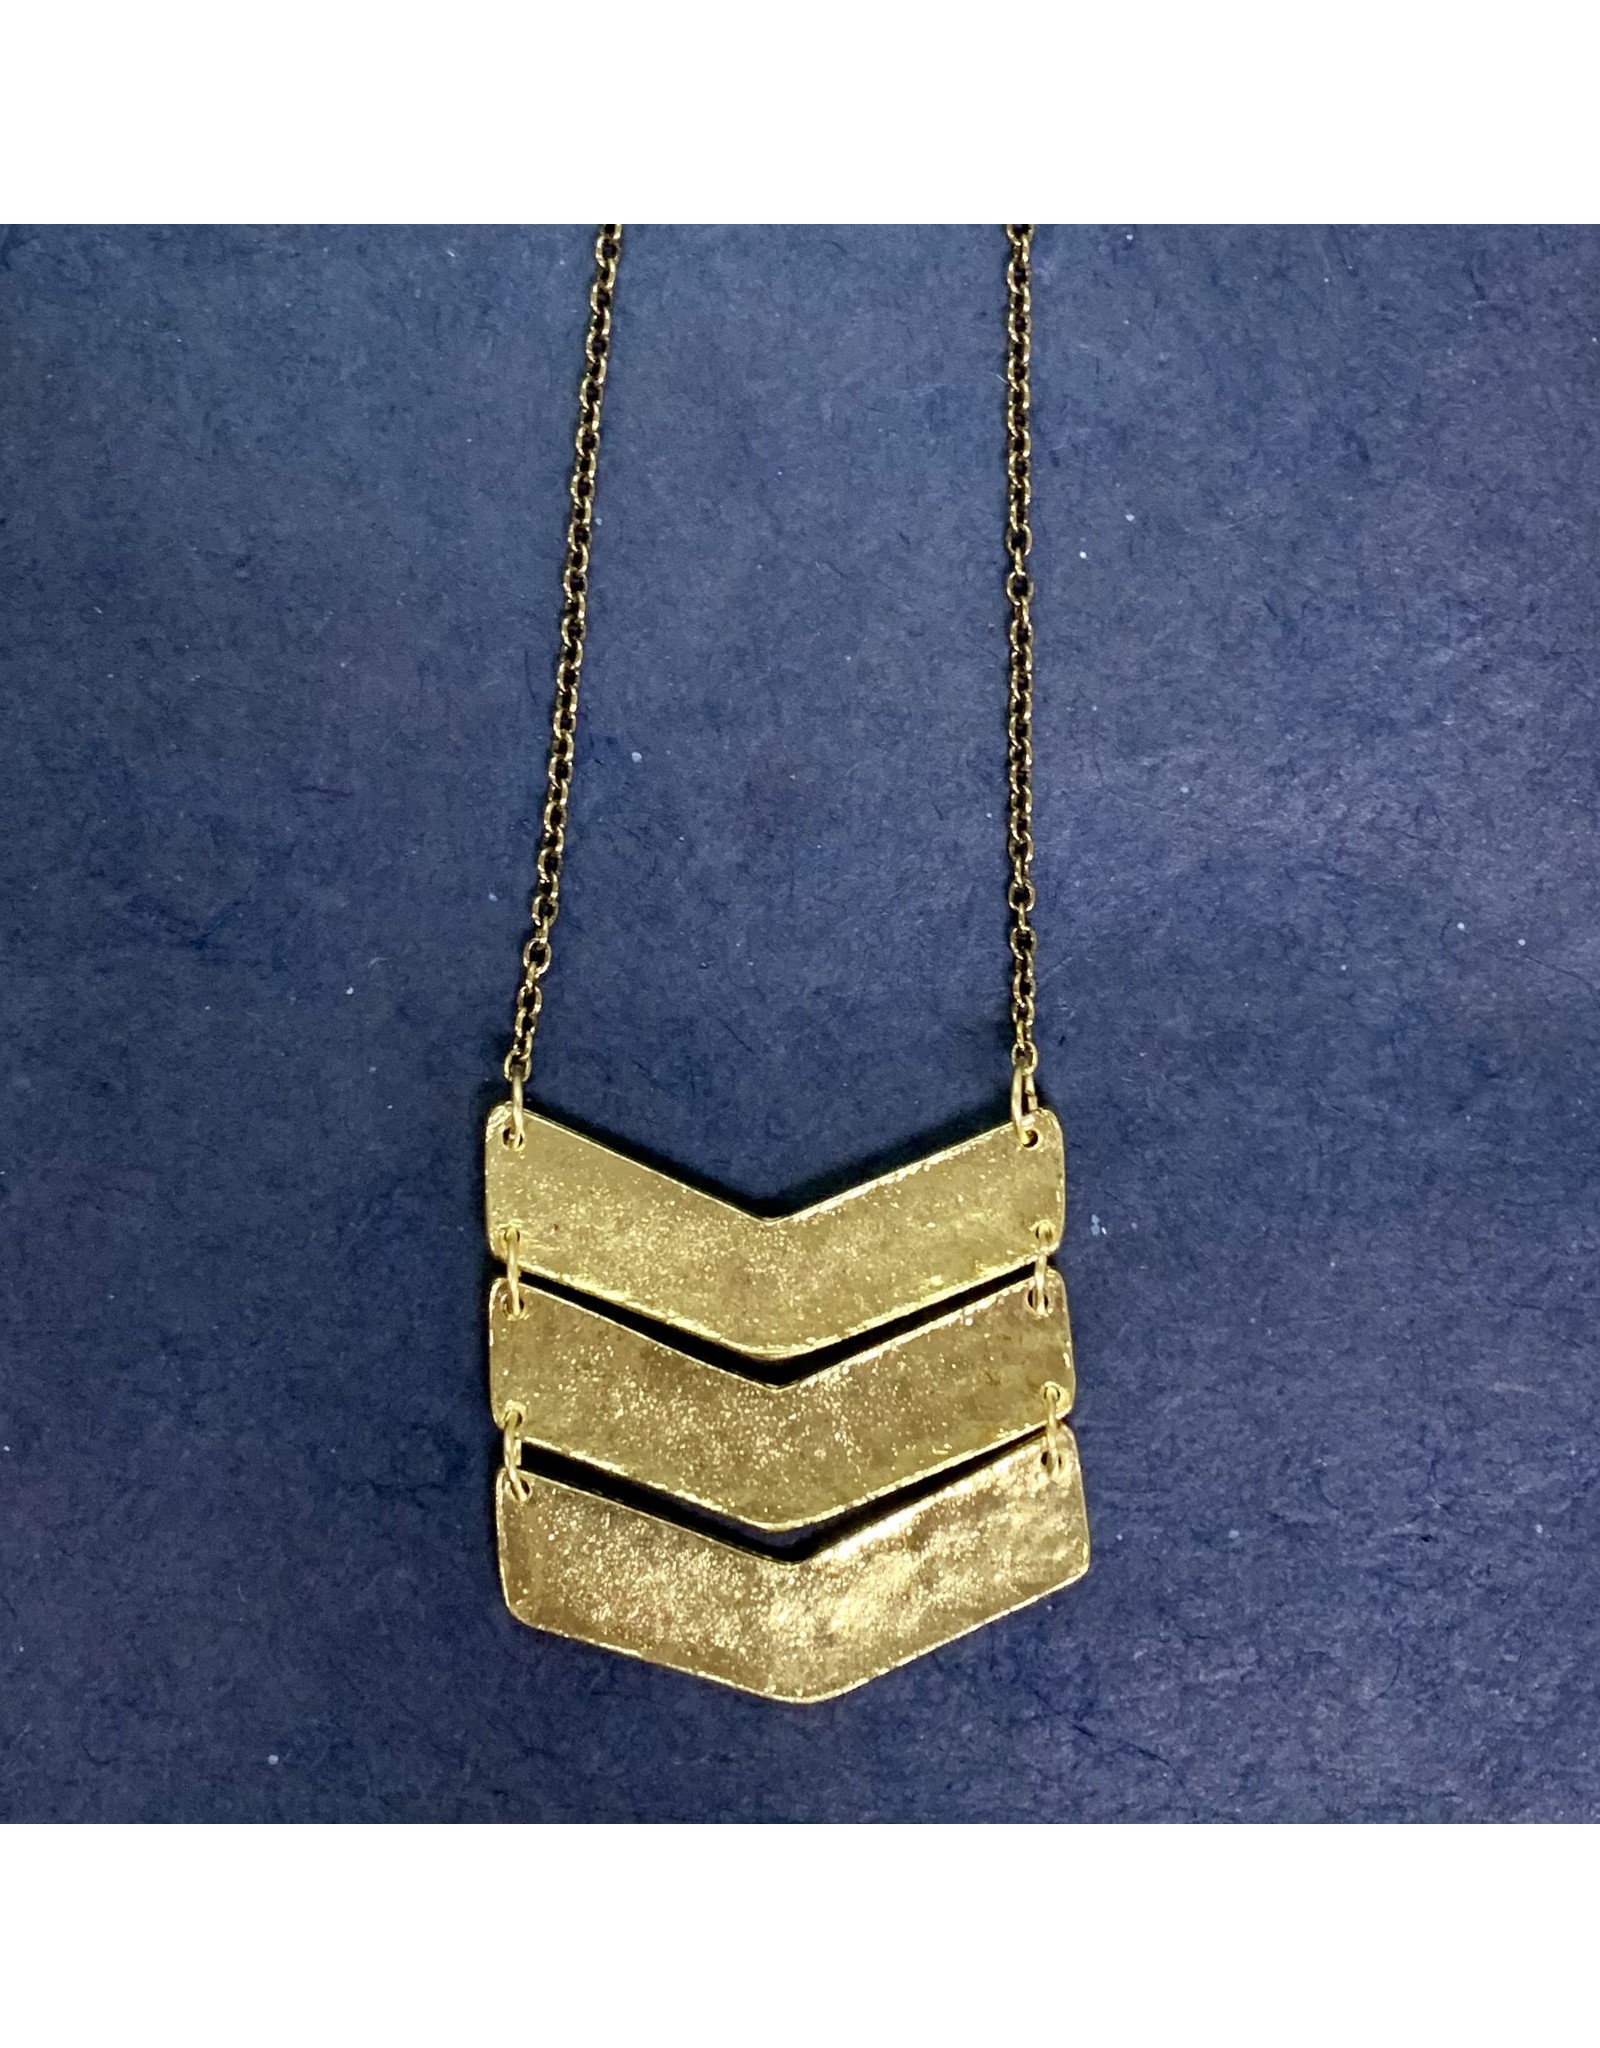 India CLEARANCE Brass Chevron Necklace, India